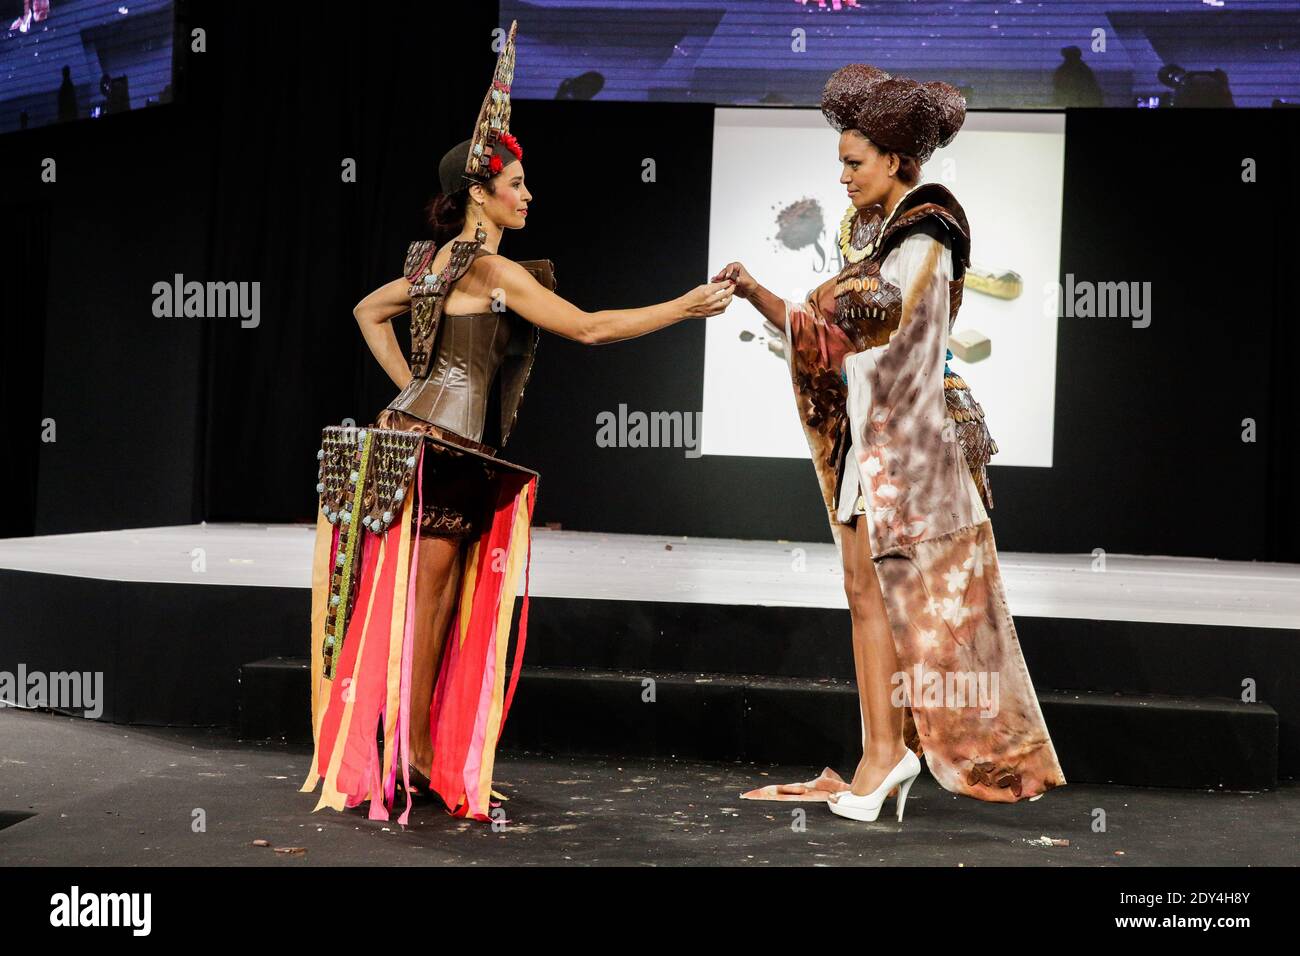 Aida Touihri wears a creation by Maison Rannou-Metivier, Laurence Roustandjee wears a creation by Audrey Lempeseur and Frederic Cassel, made with chocolate during a fashion show at the inauguration of the 20th annual Salon du Chocolat in Paris, France on October 28, 2014. The show, the world's biggest dedicated to chocolate, brings together fashion designers and chocolatiers from around the world. Photo by Jerome Domine/ABACAPRESS.COM Stock Photo